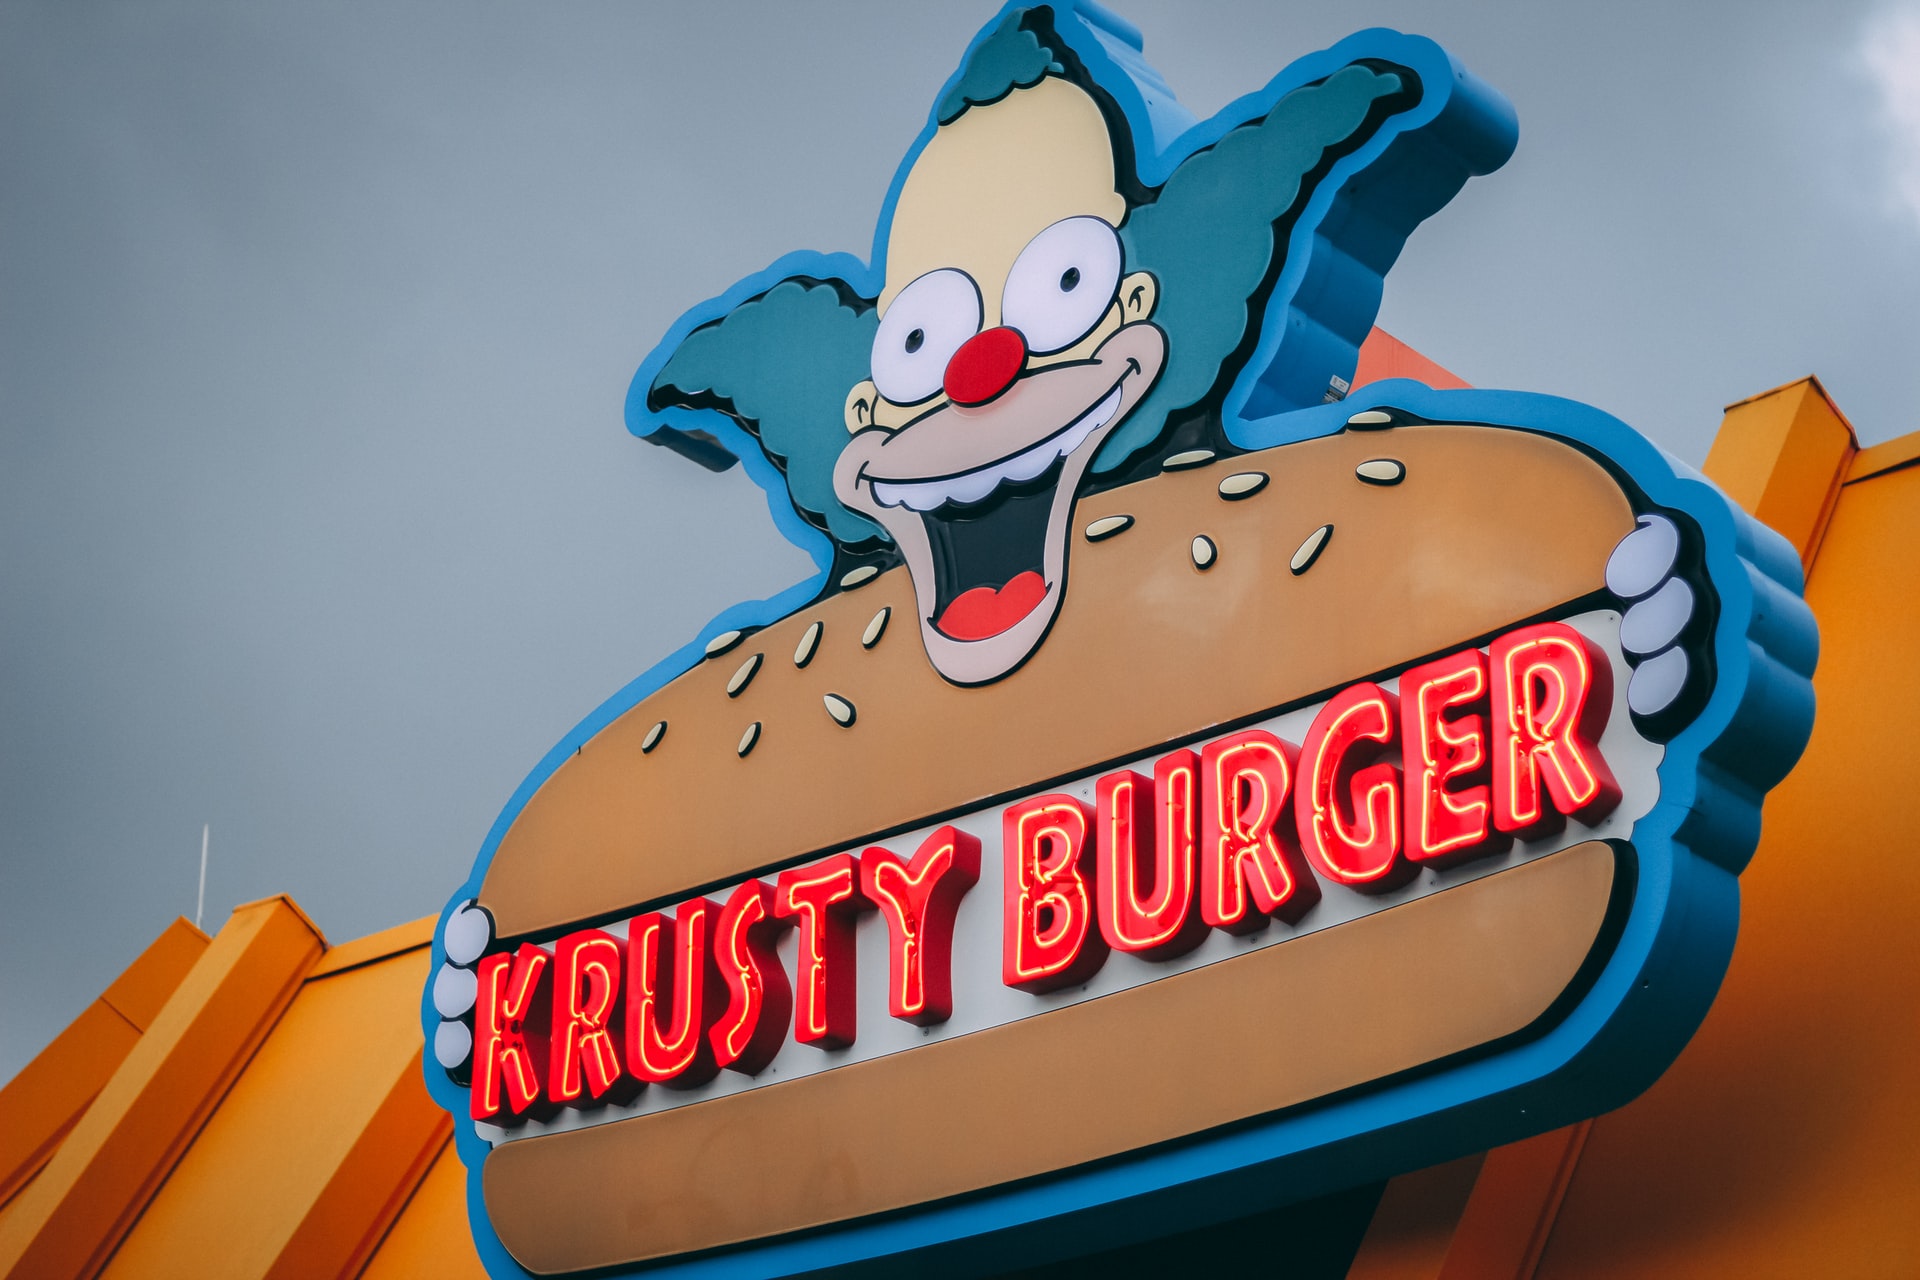 A sign for Krusty Burger at Universal Studios Hollywood in LA